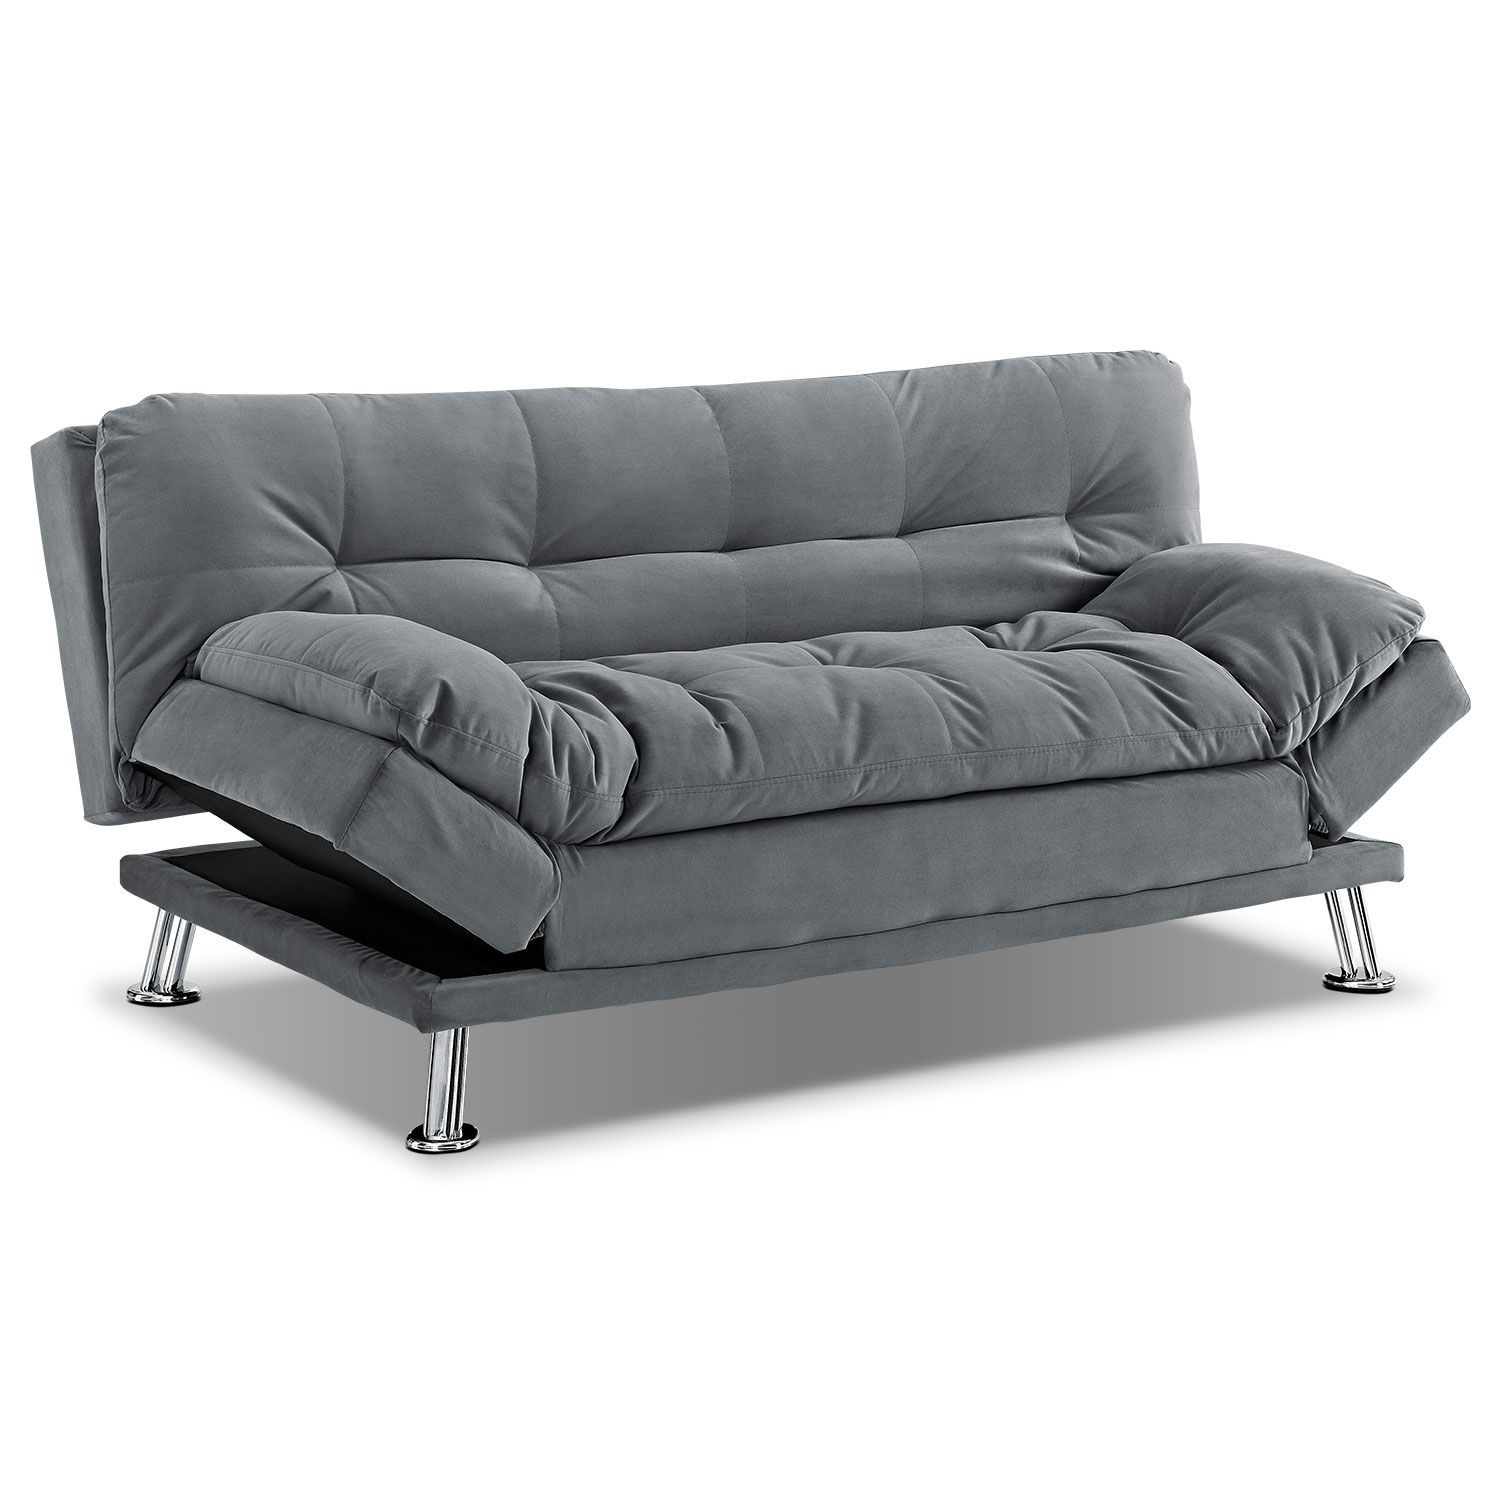 Waltz Gray Futon Sofa Bed | Value City Furniture | Bel Air Move Inside Moana Blue Leather Power Reclining Sofa Chairs With Usb (View 8 of 25)